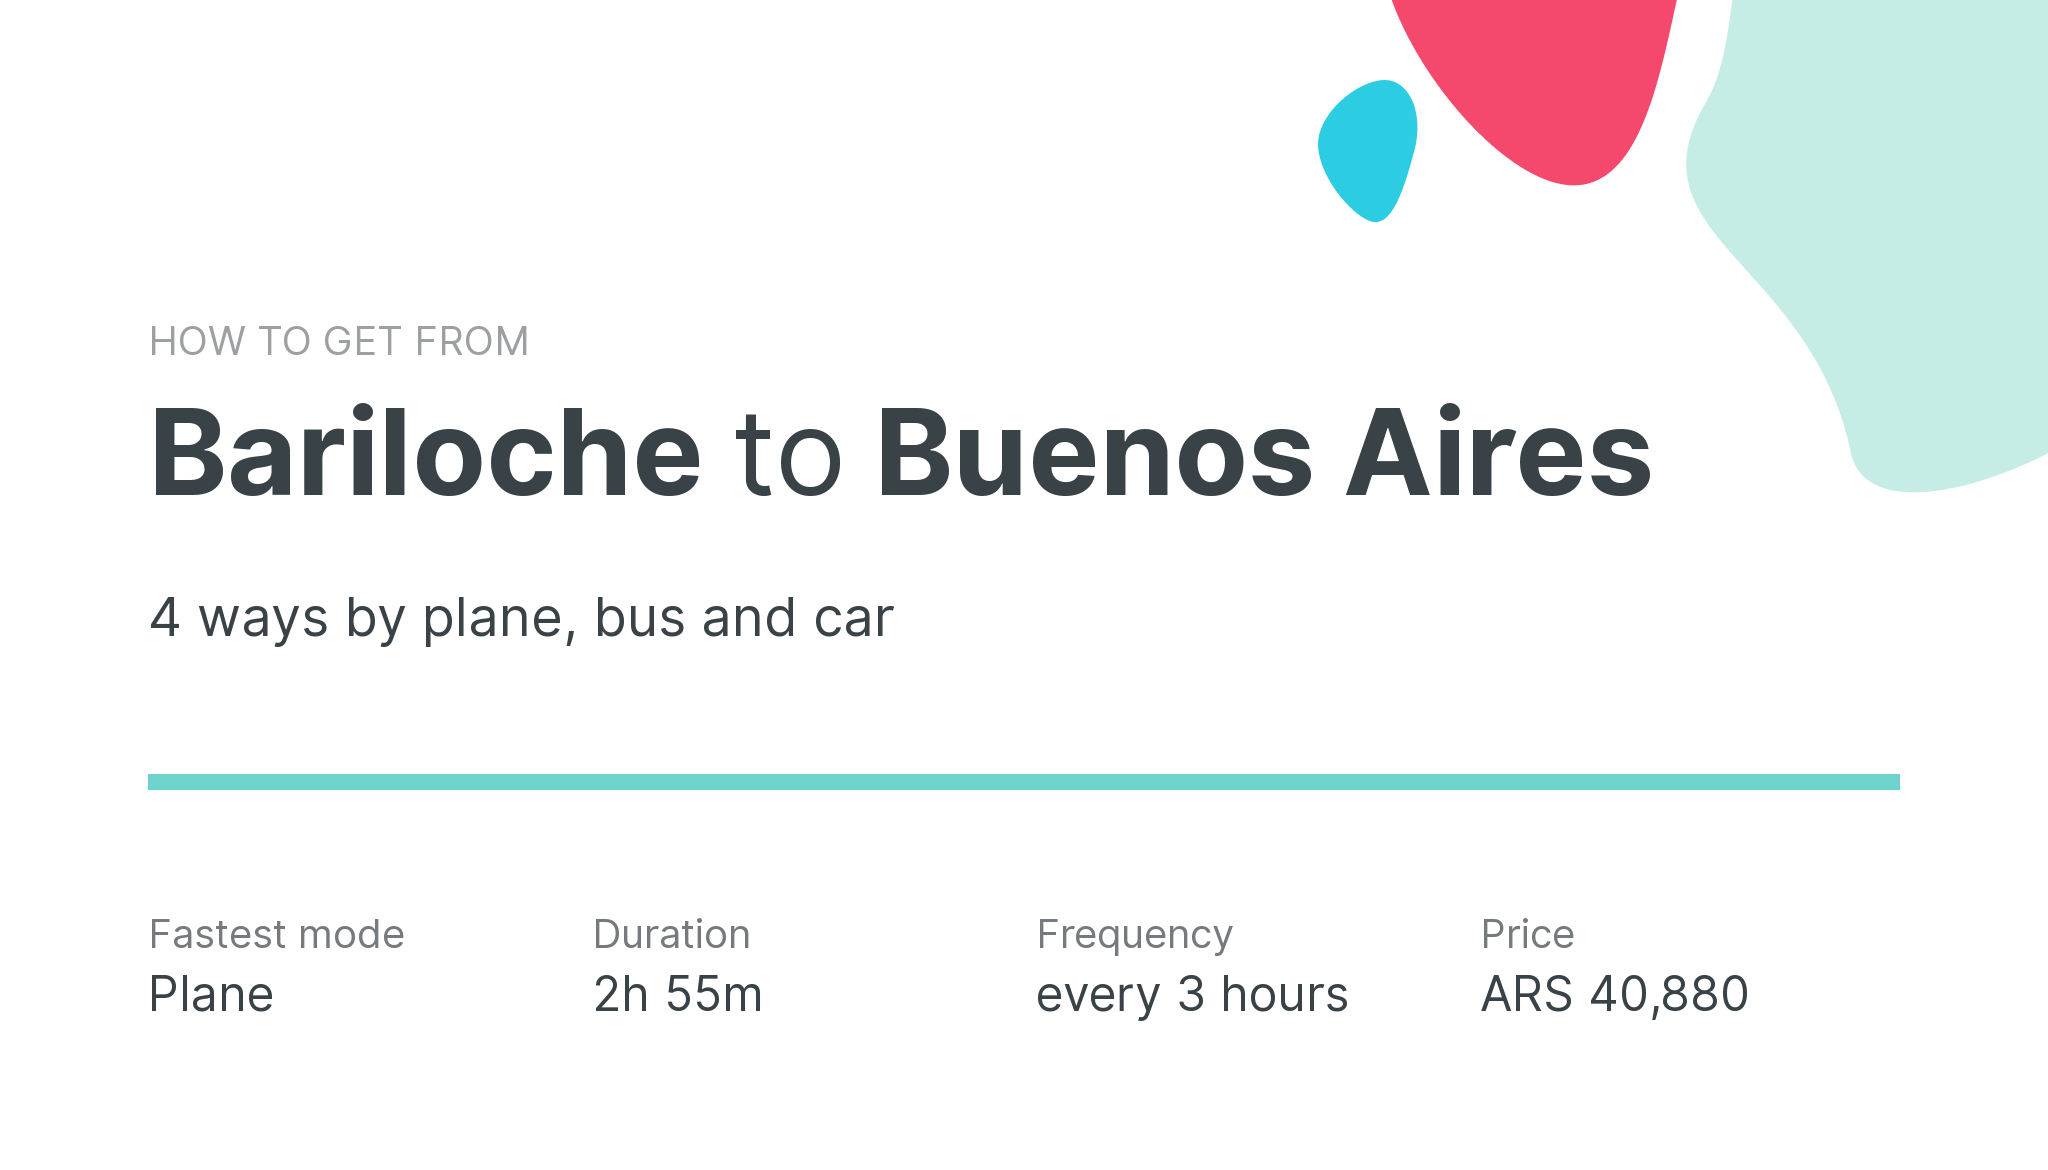 How do I get from Bariloche to Buenos Aires